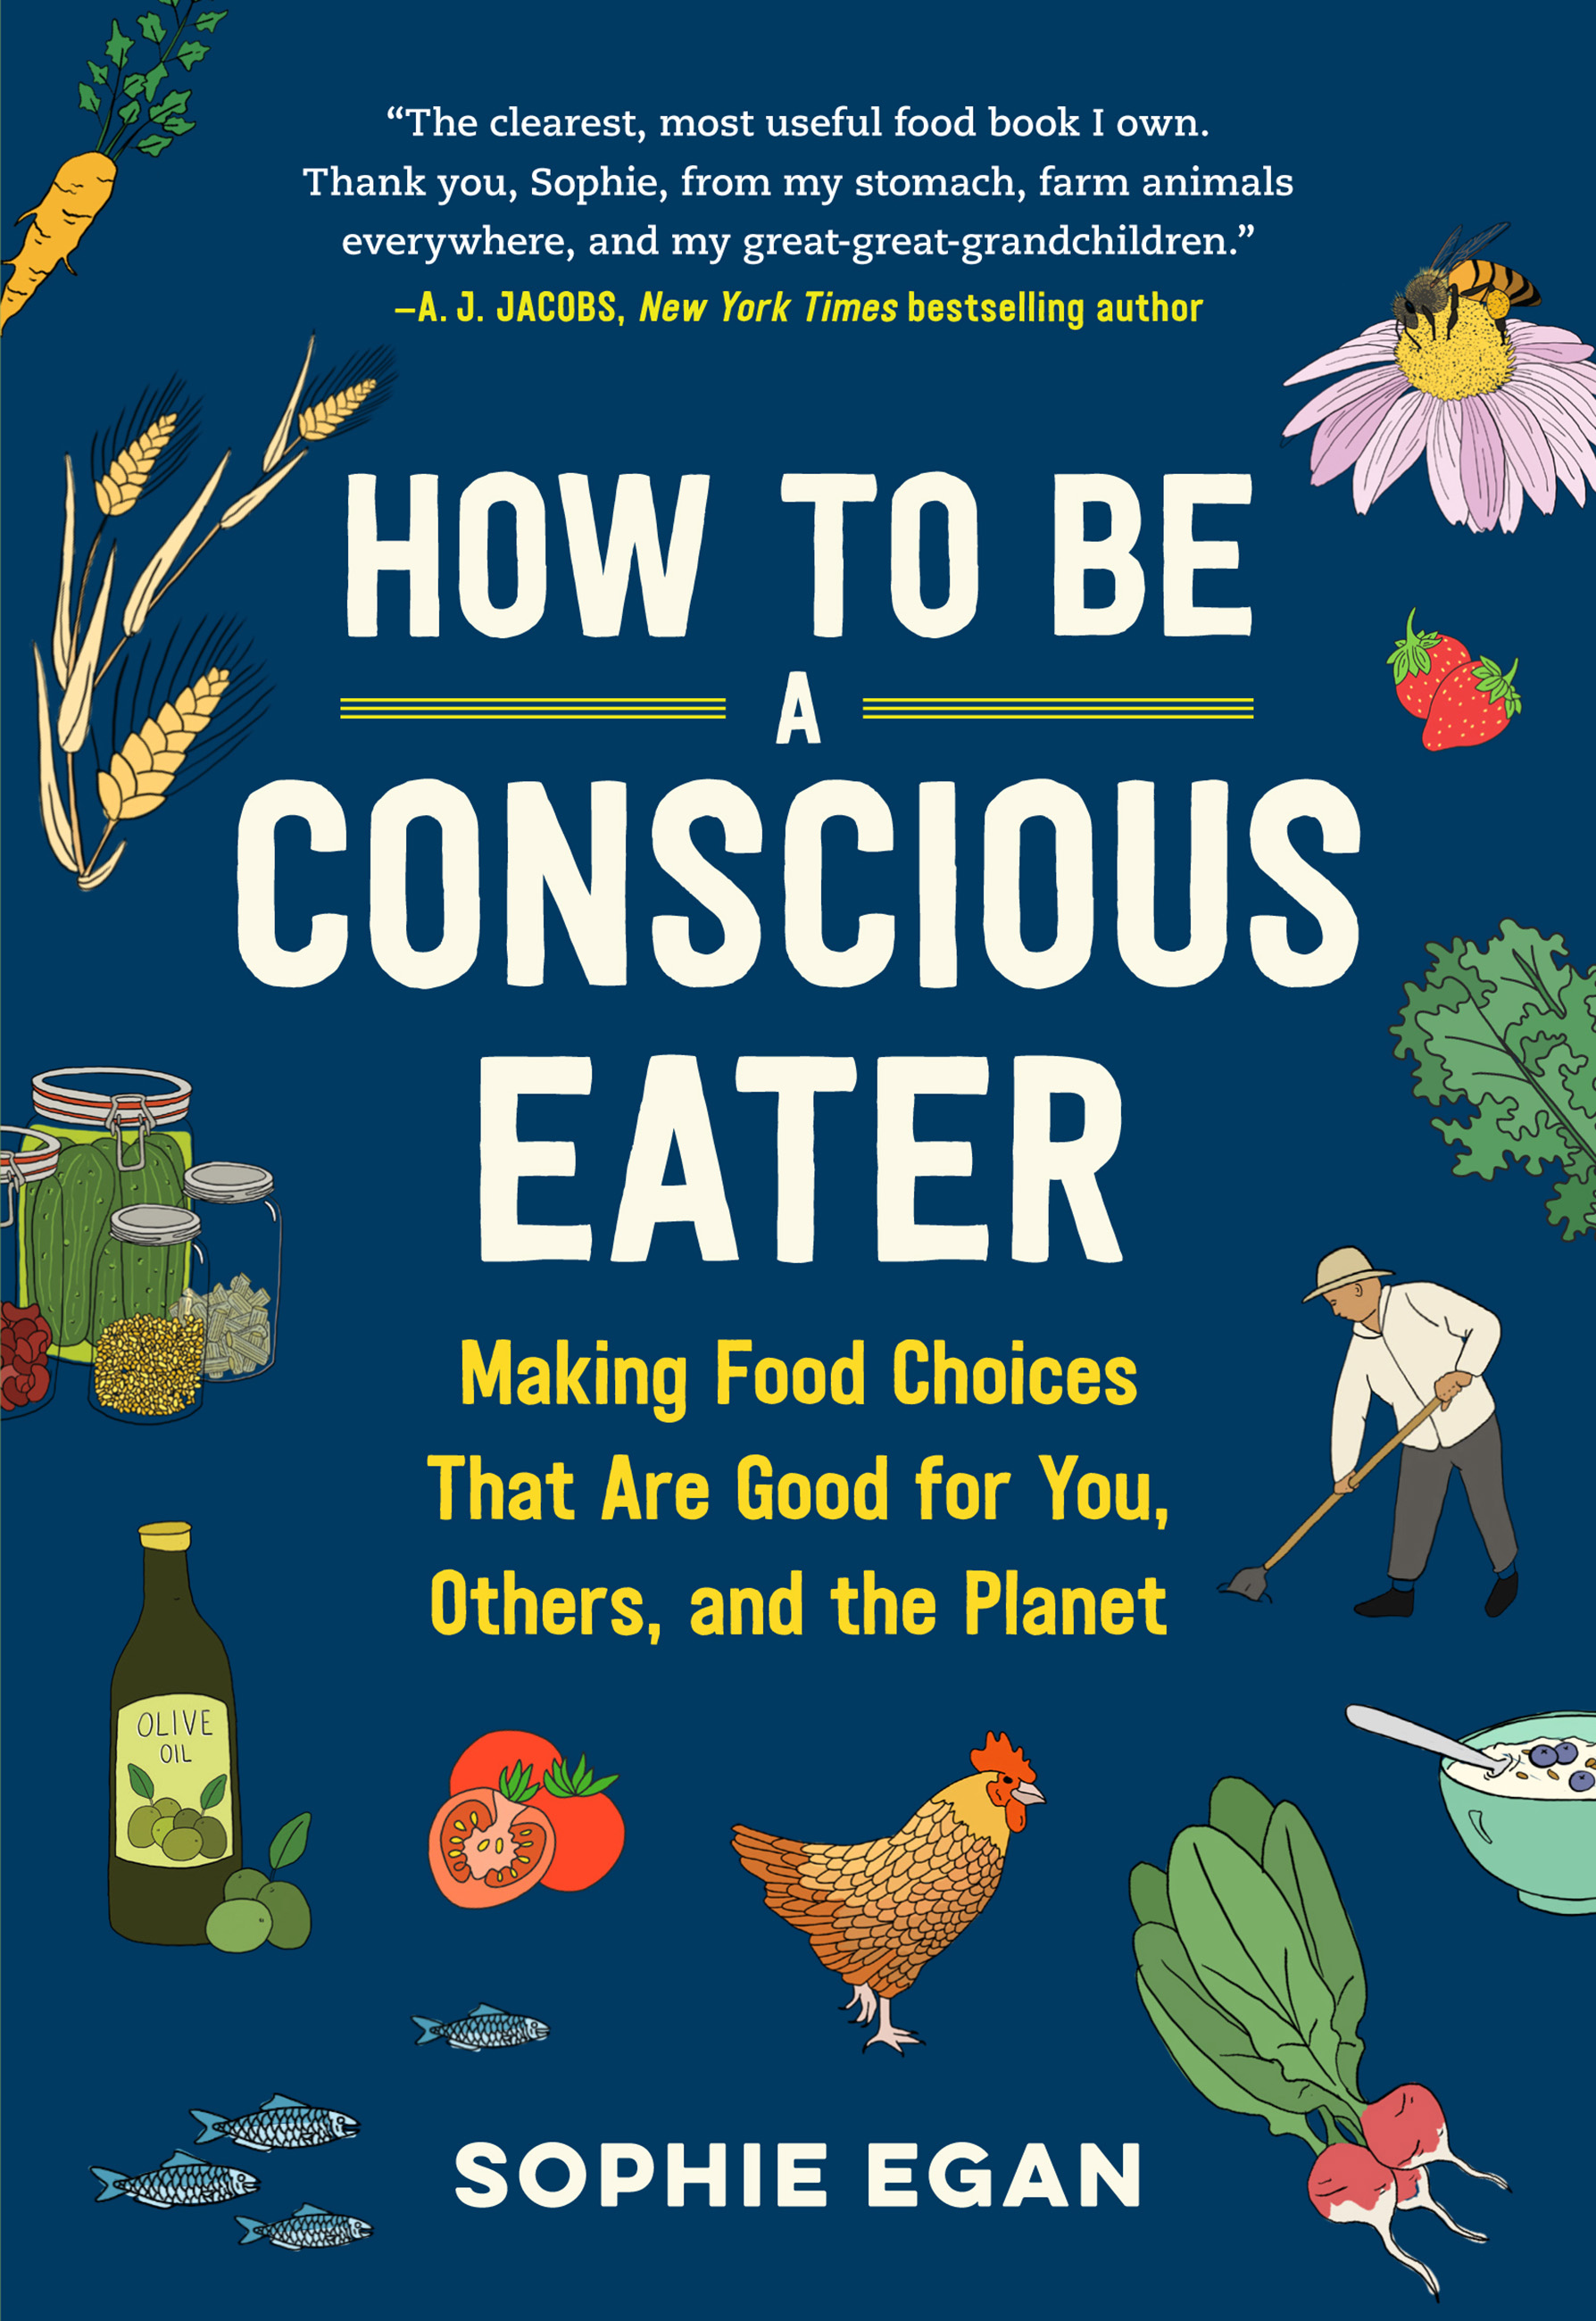 How to Be a Conscious Eater Making Food Choices That Are Good for You, Others, and the Planet cover image